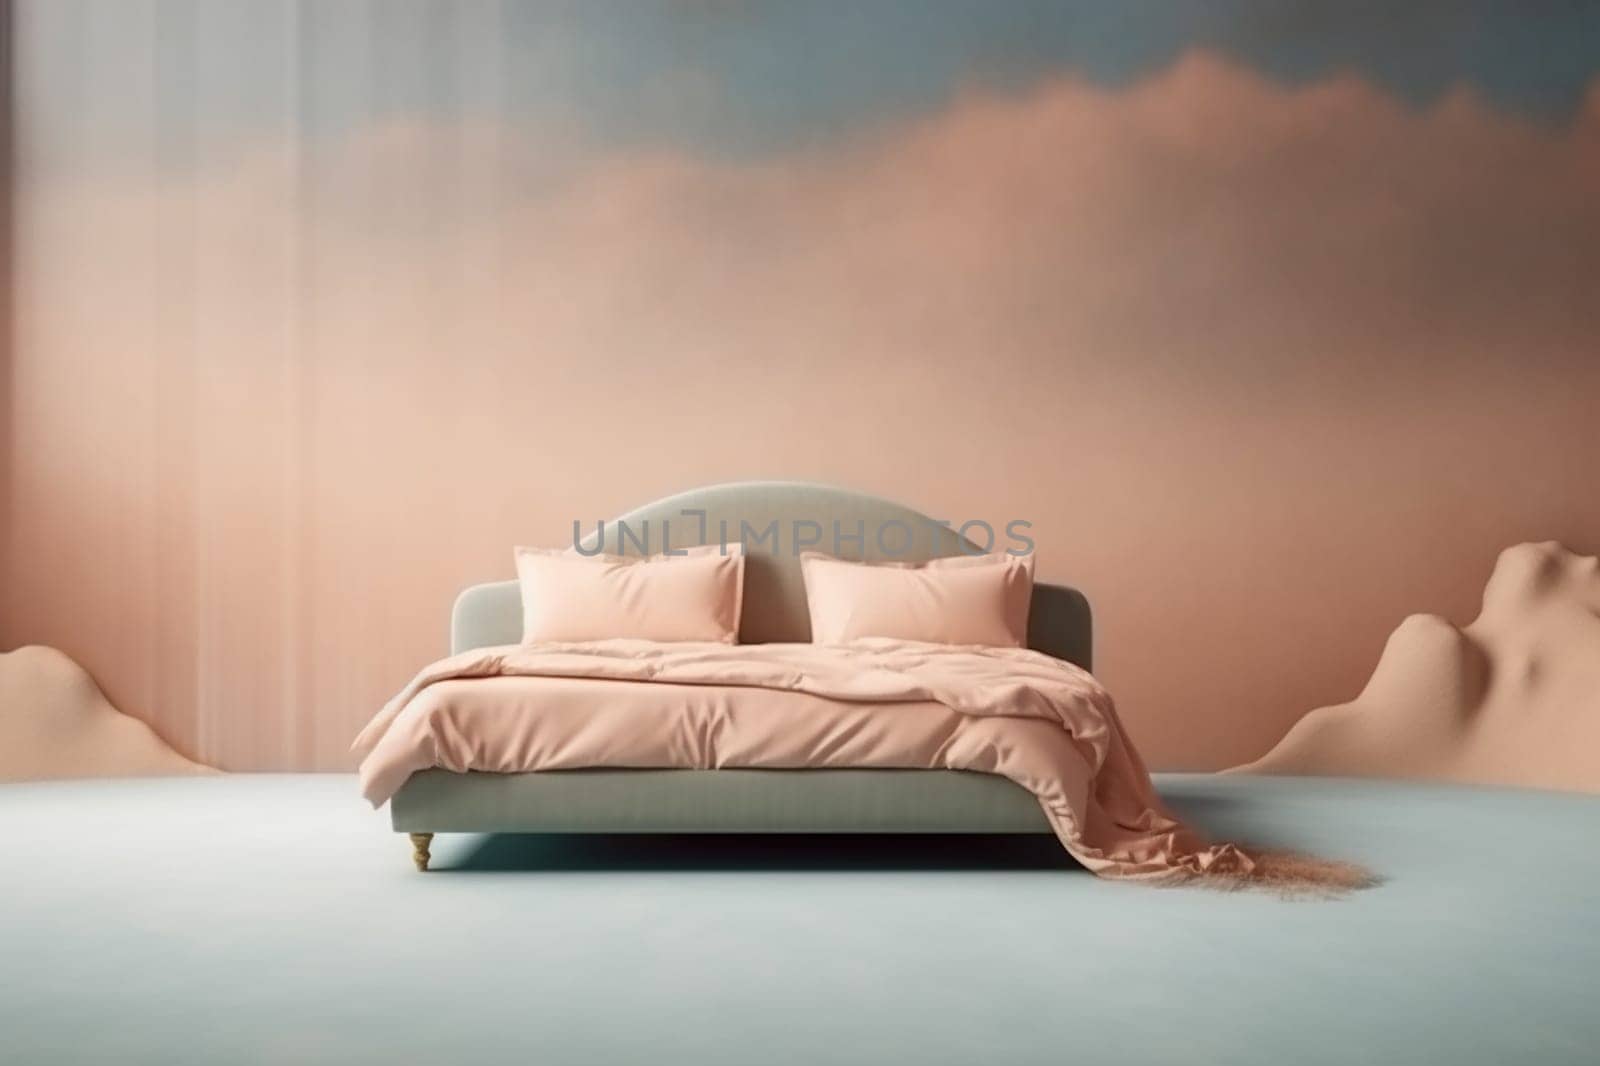 Modern luxury apartment bedroom interior with elegant bed, soft pastel bedding, and abstract wall design in a minimalist style.